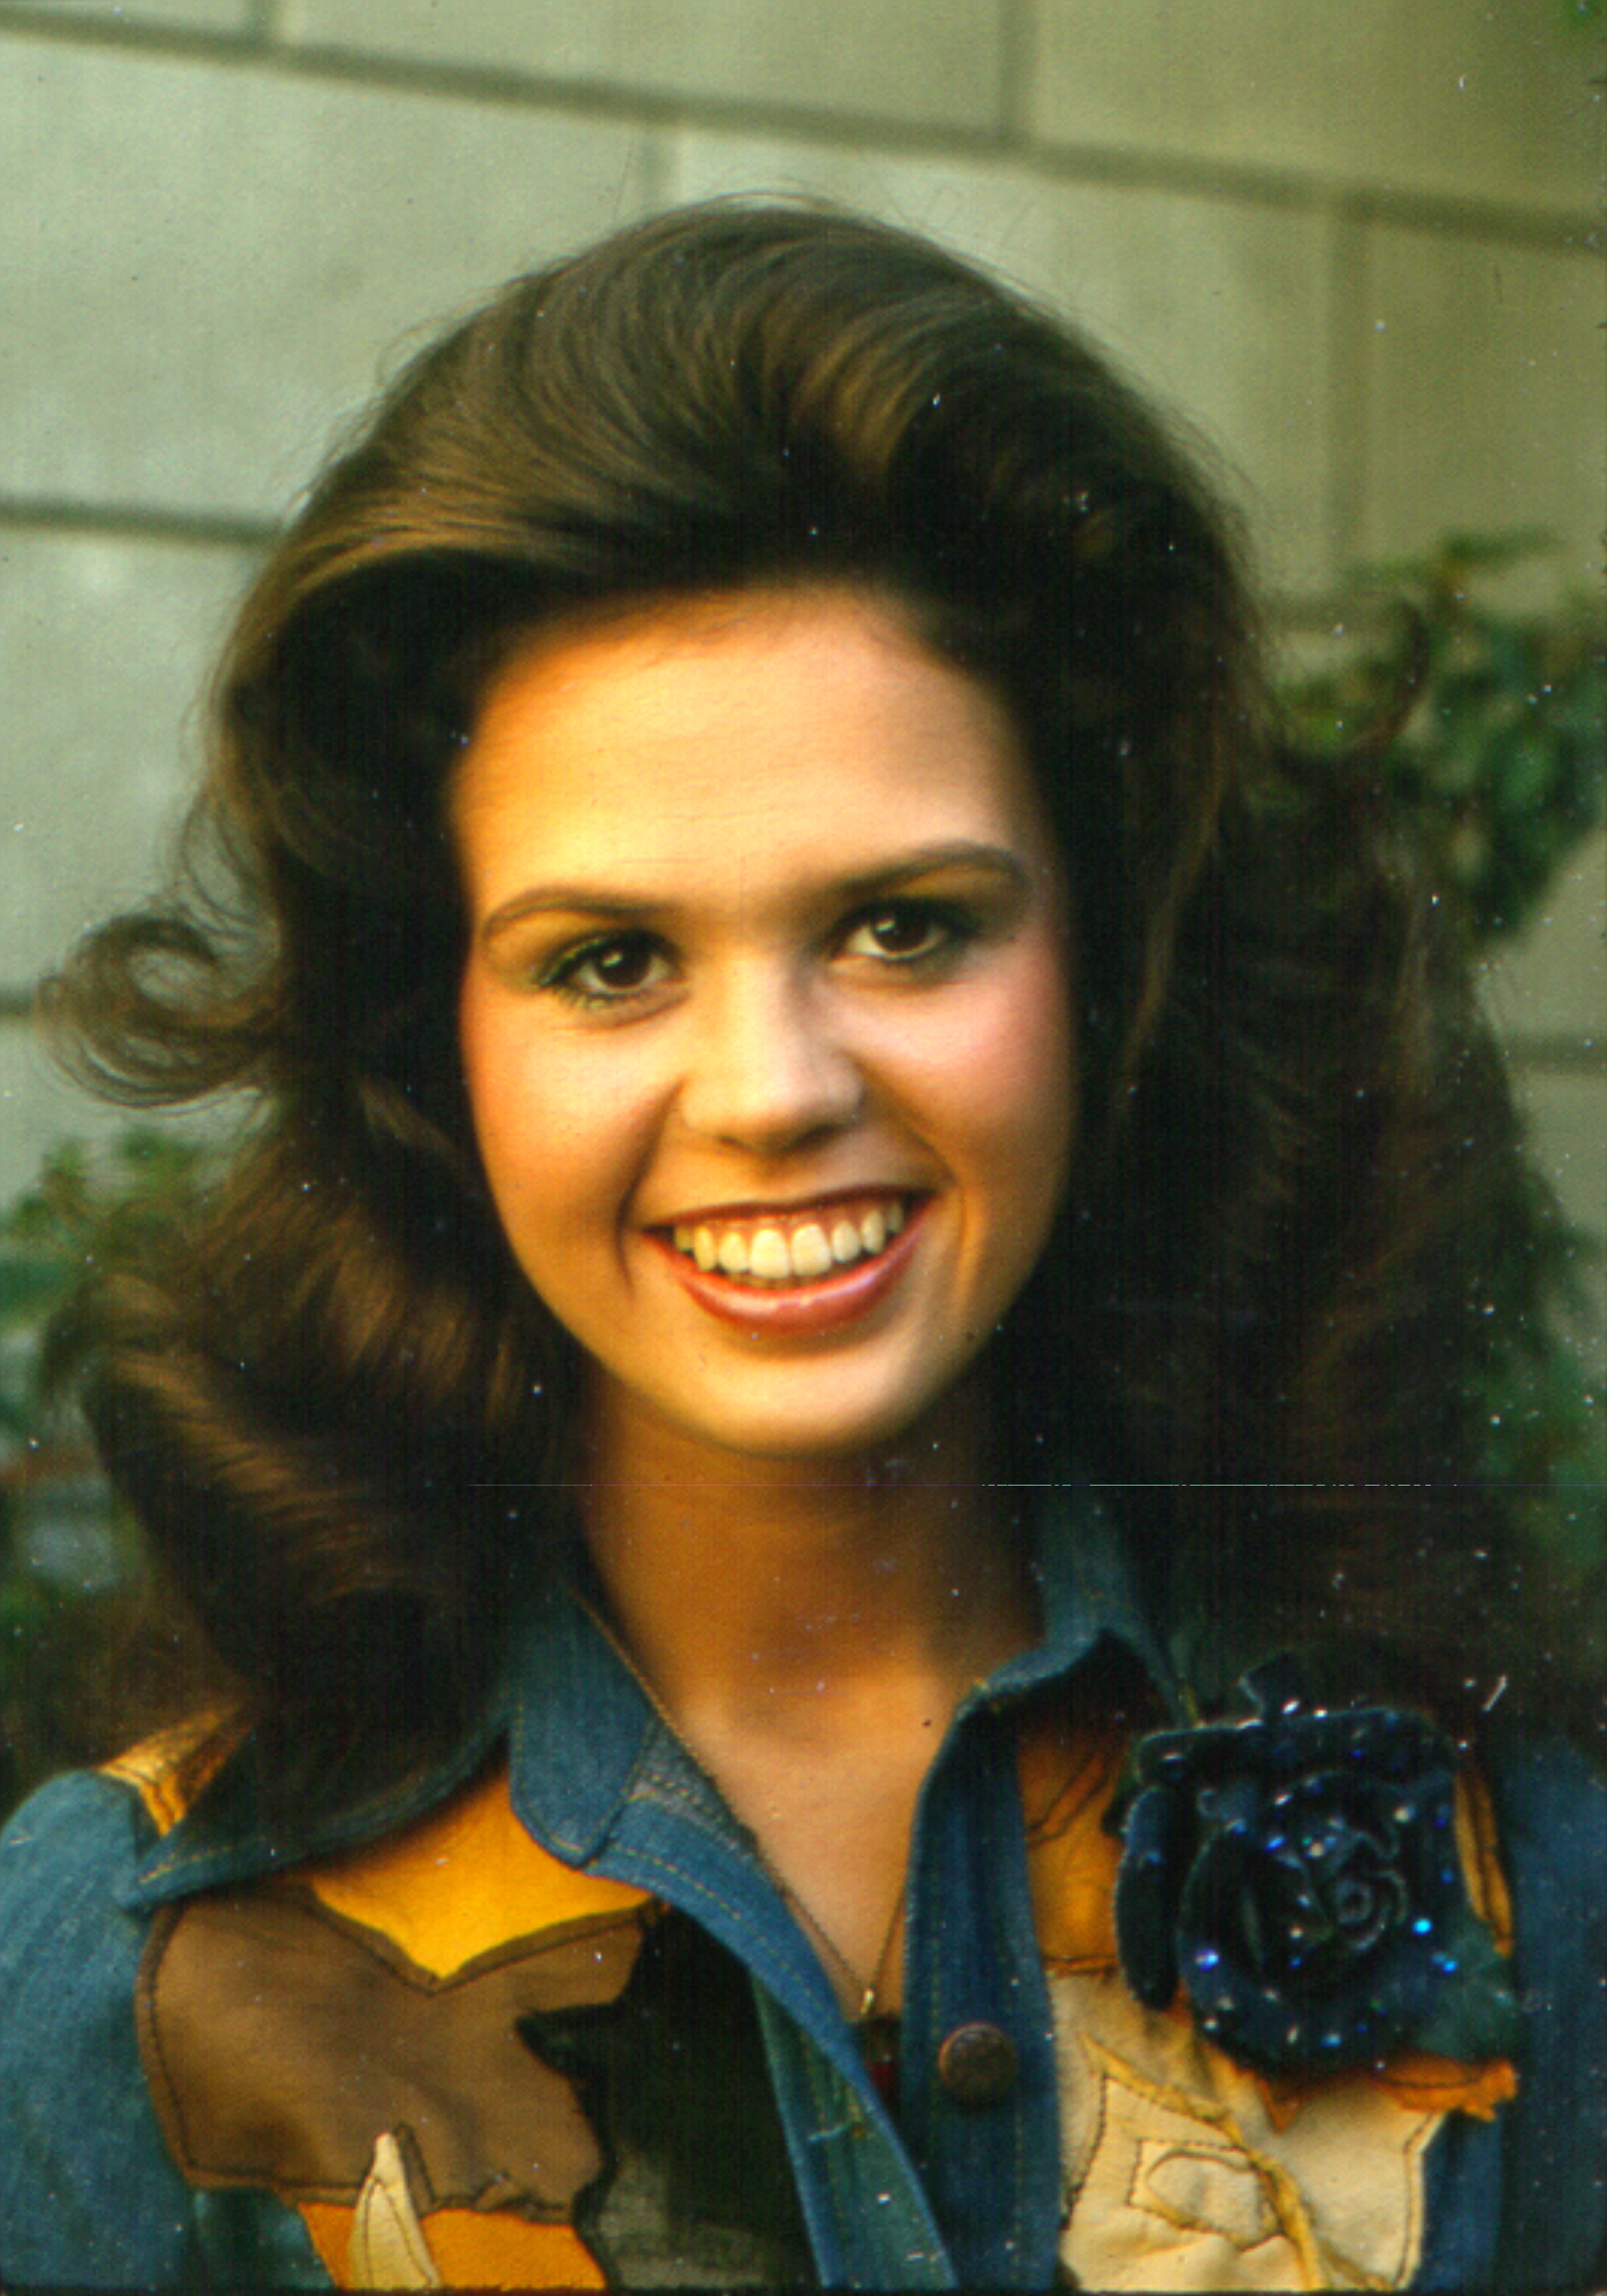 <p>Marie Osmond is the only Osmond sibling who was never a part of the family singing group, but she found fame as a solo artist beginning in the '70s. Unlike her brothers, who stuck to rock and pop, Marie started out in the country music genre. Her first single, "Paper Roses," was released in 1973 and became a No. 1 country hit that even achieved major crossover success and also hit the top 5 on Billboard's pop chart. Apart from music, Marie also made waves on television co-hosting "Donny & Marie" alongside brother Donny Osmond in the late '70s.</p>